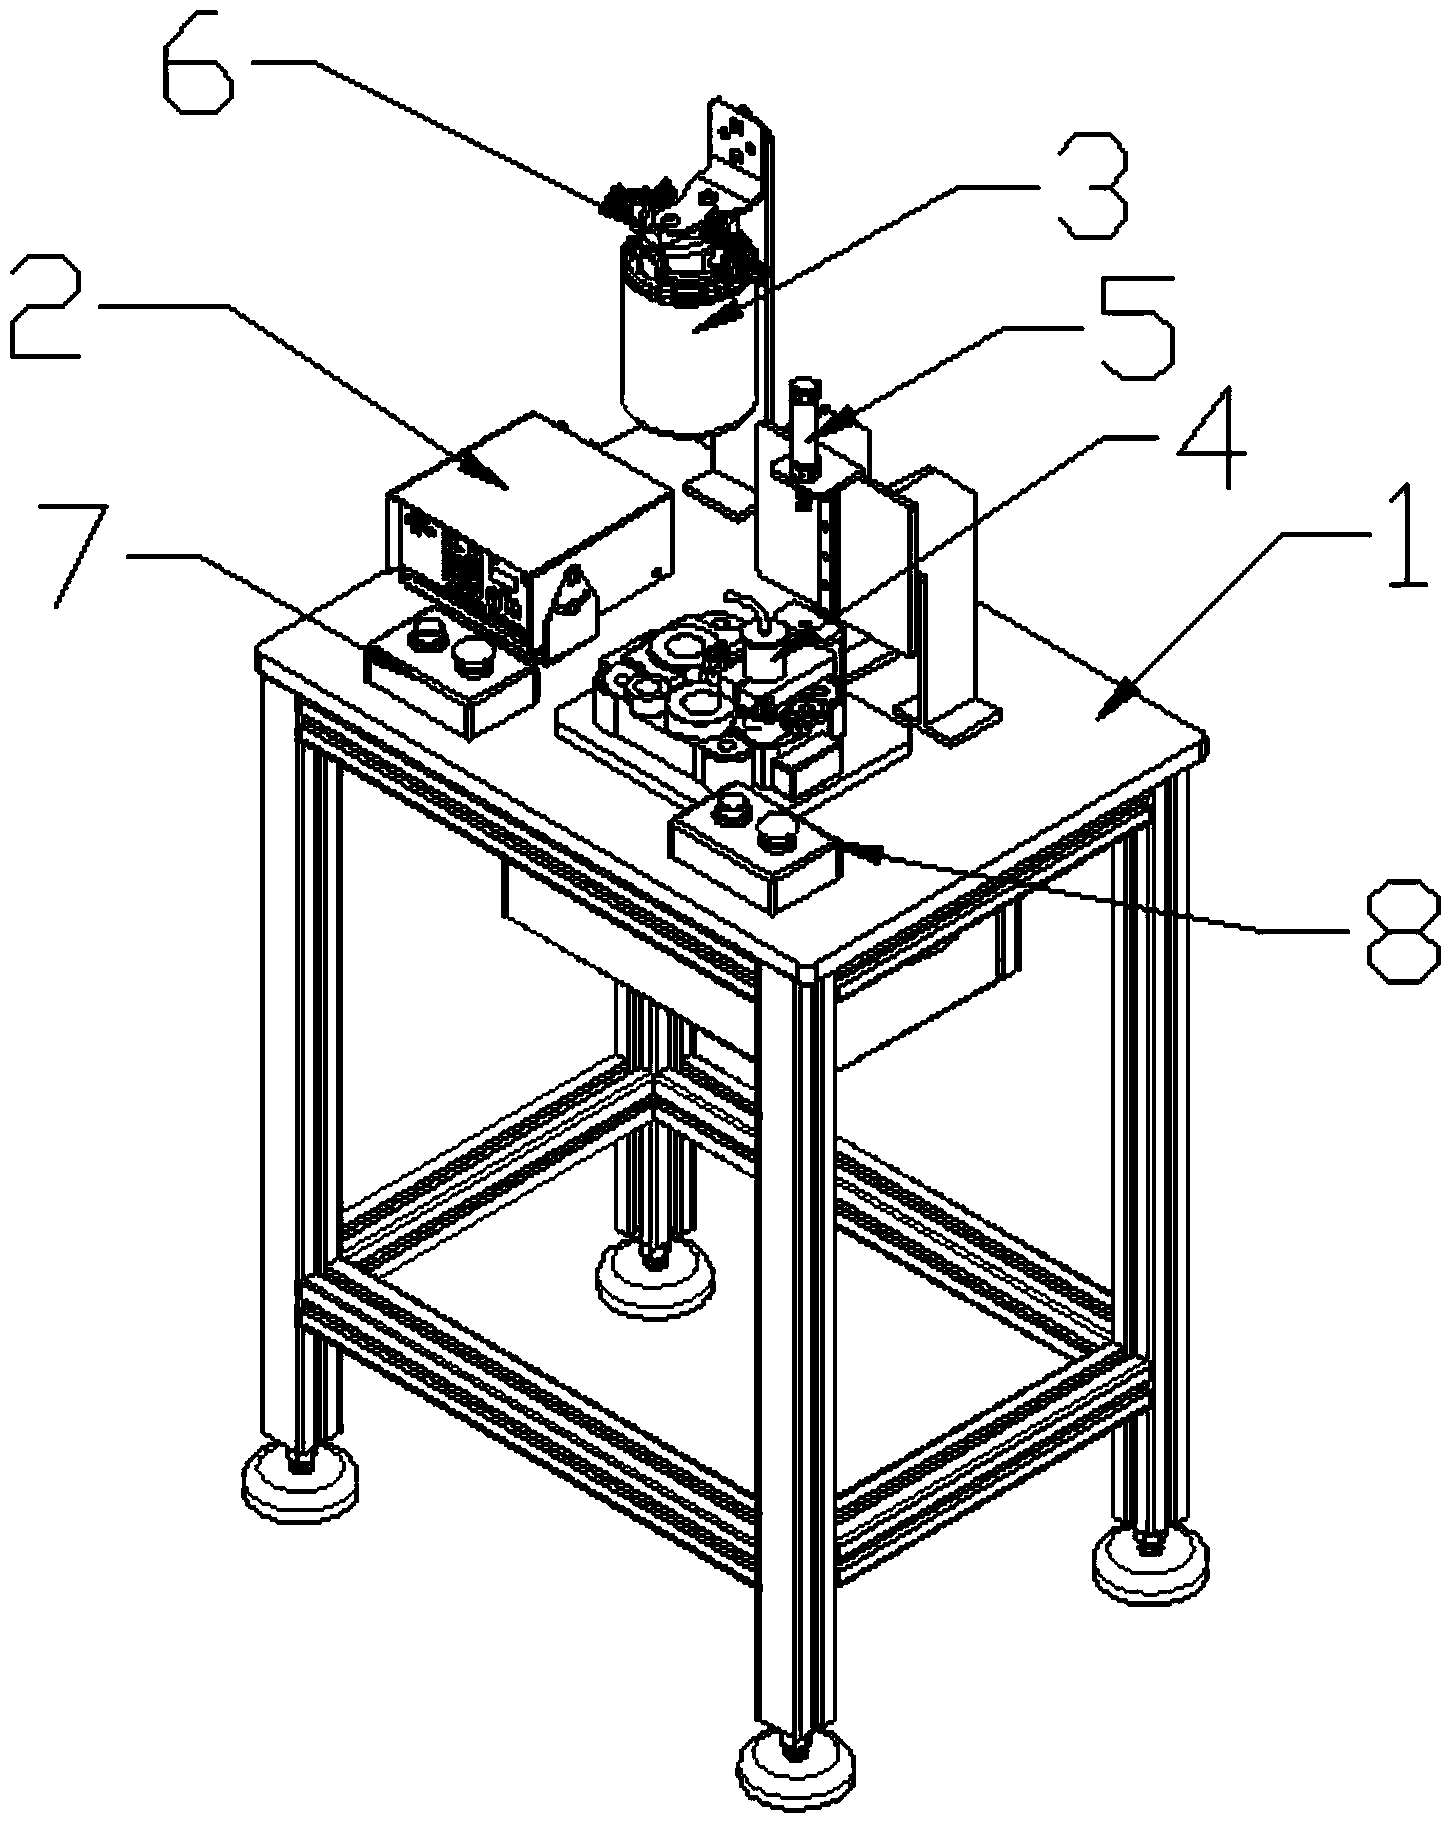 Uniform and high-accuracy oil coating device for inner walls of holes